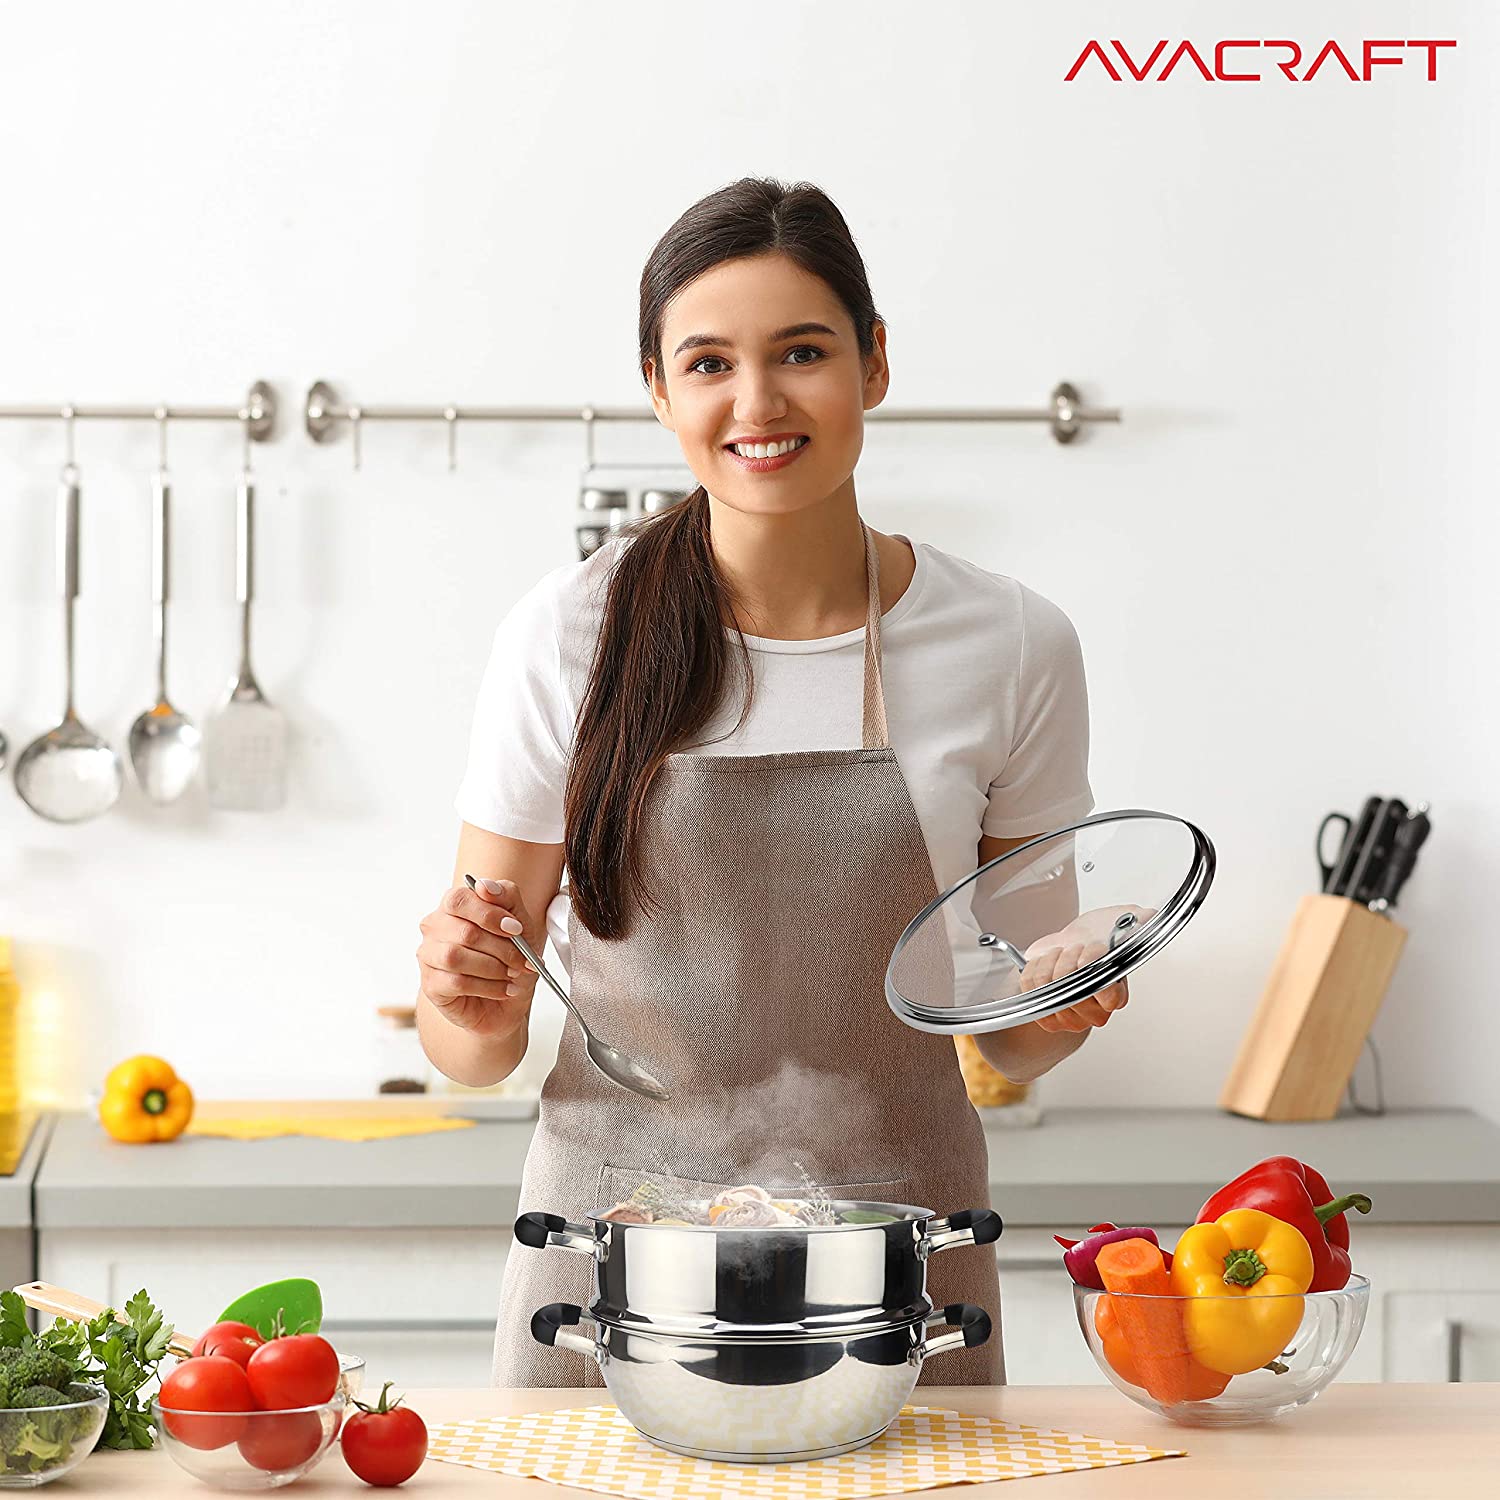 AVACRAFT 18/10, 3 Piece Stainless Steel Steamer Cooking Pot Set, Steamer for Cooking, Everyday Pan, Steamer Pan Set, with Glass Lid, Induction Cooktop